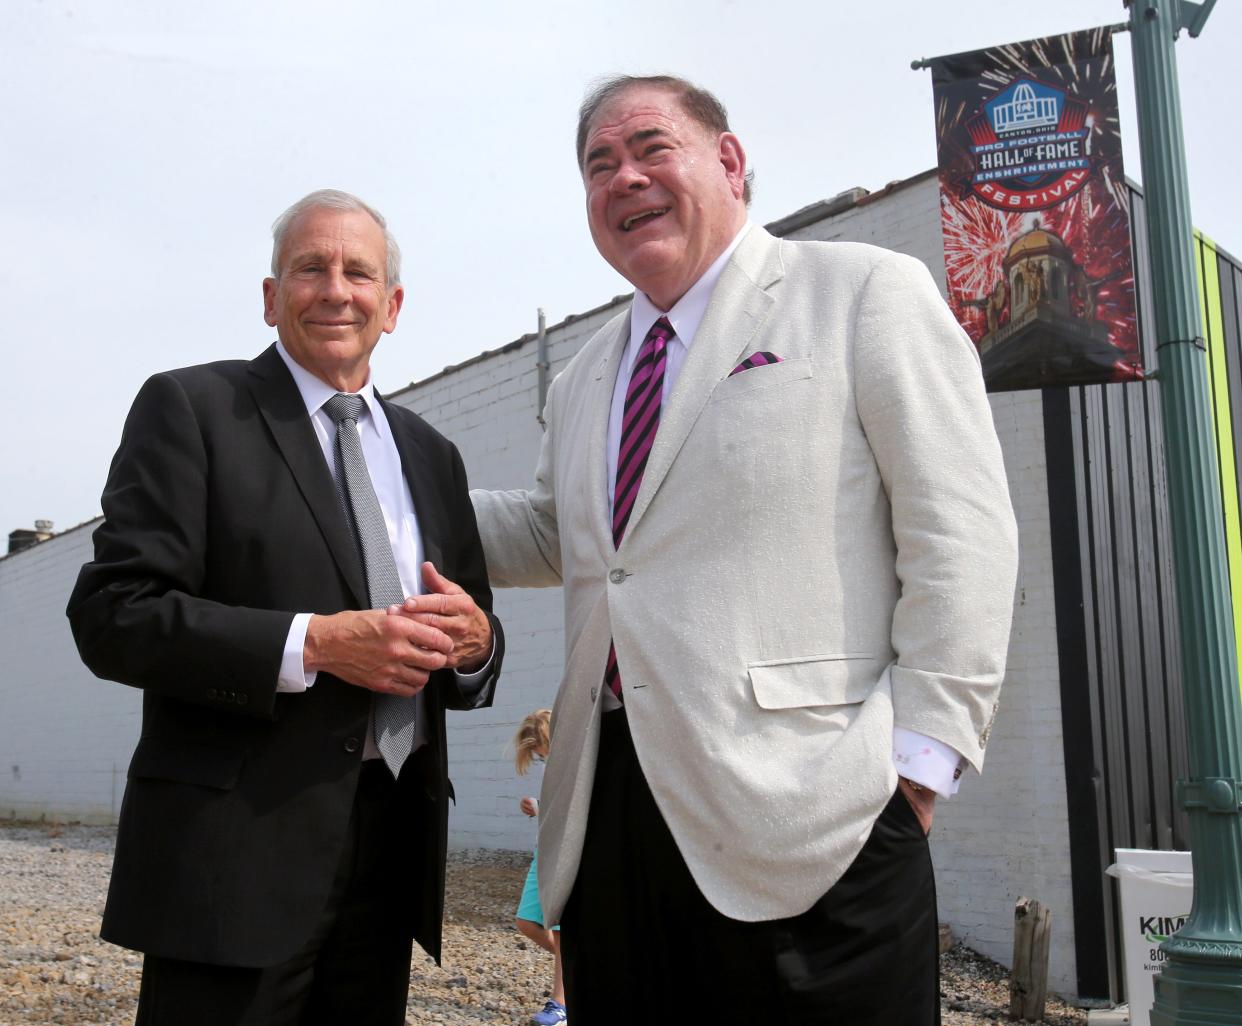 Canton Mayor Thomas M. Bernabei, left, speaks with David Baker, president and CEO of the Pro Football Hall of Fame, prior to the unveiling of the "1958 Championship Game" statue in Canton in August 2021. It is the final piece in "The ELEVEN" football-themed art pieces located throughout Canton.